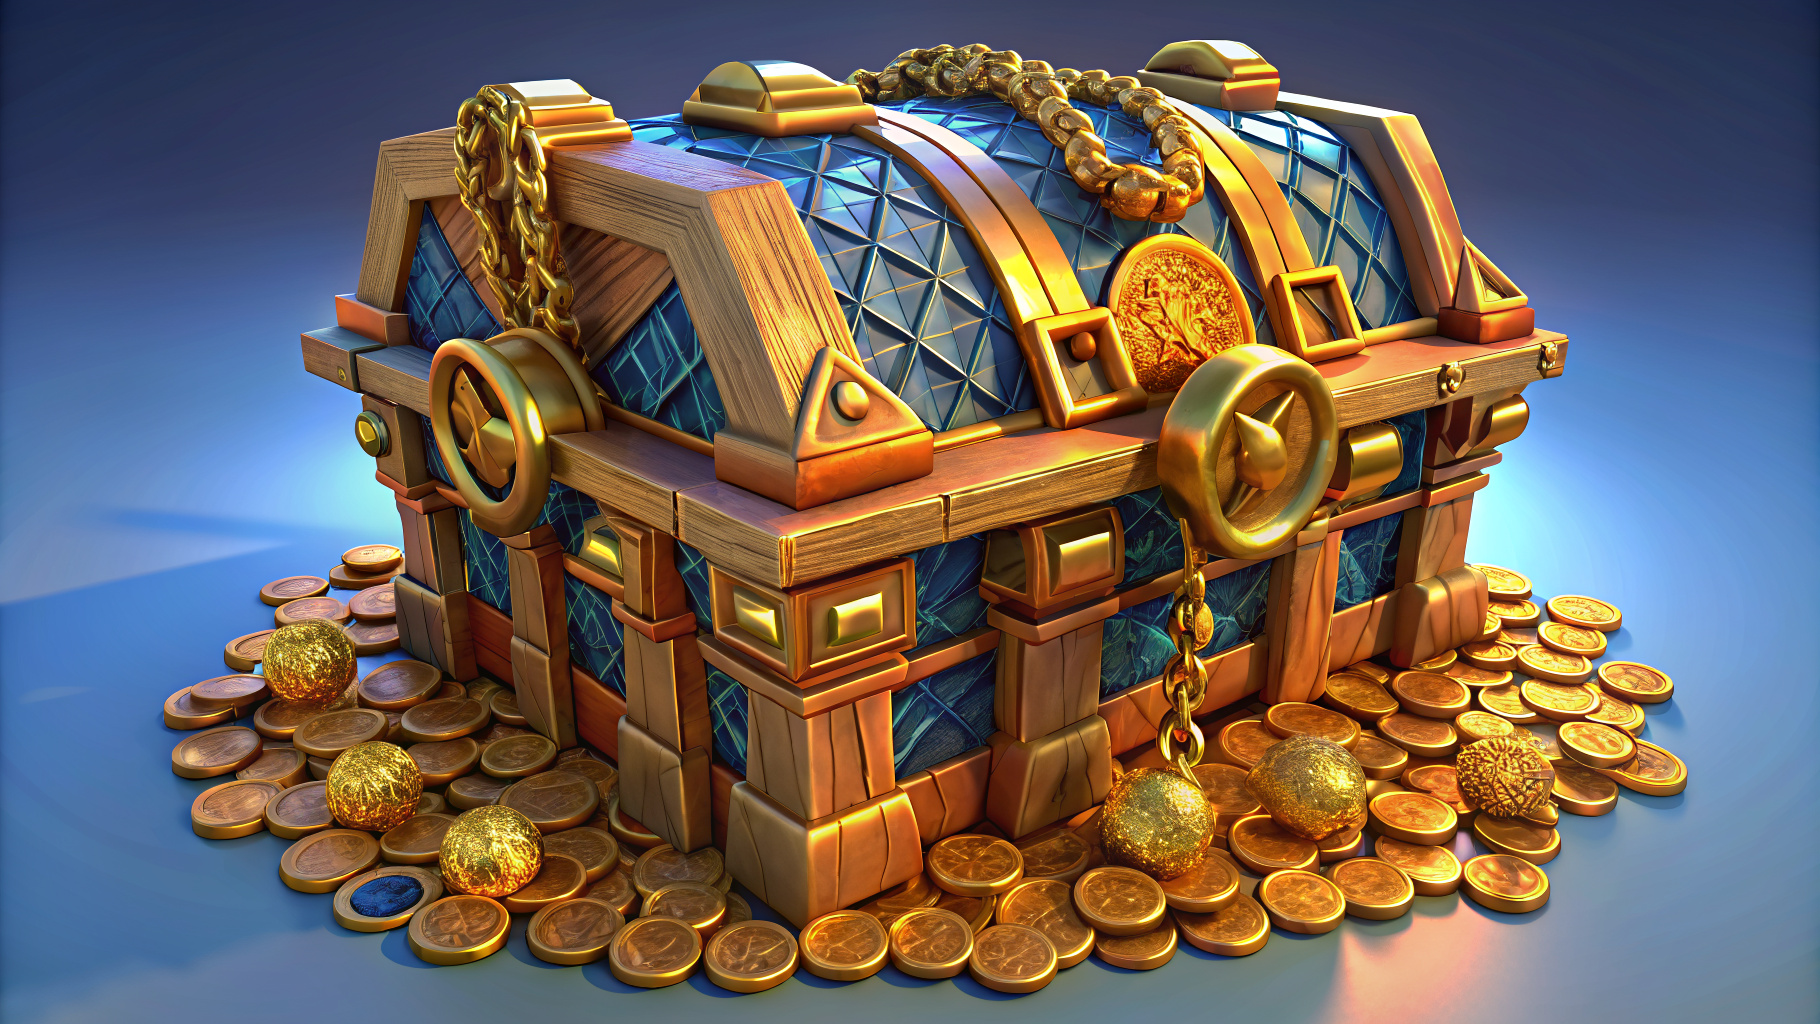 3d-rendered icon of a chest adorned with Roman symbols, overflowing with coins or tokens.